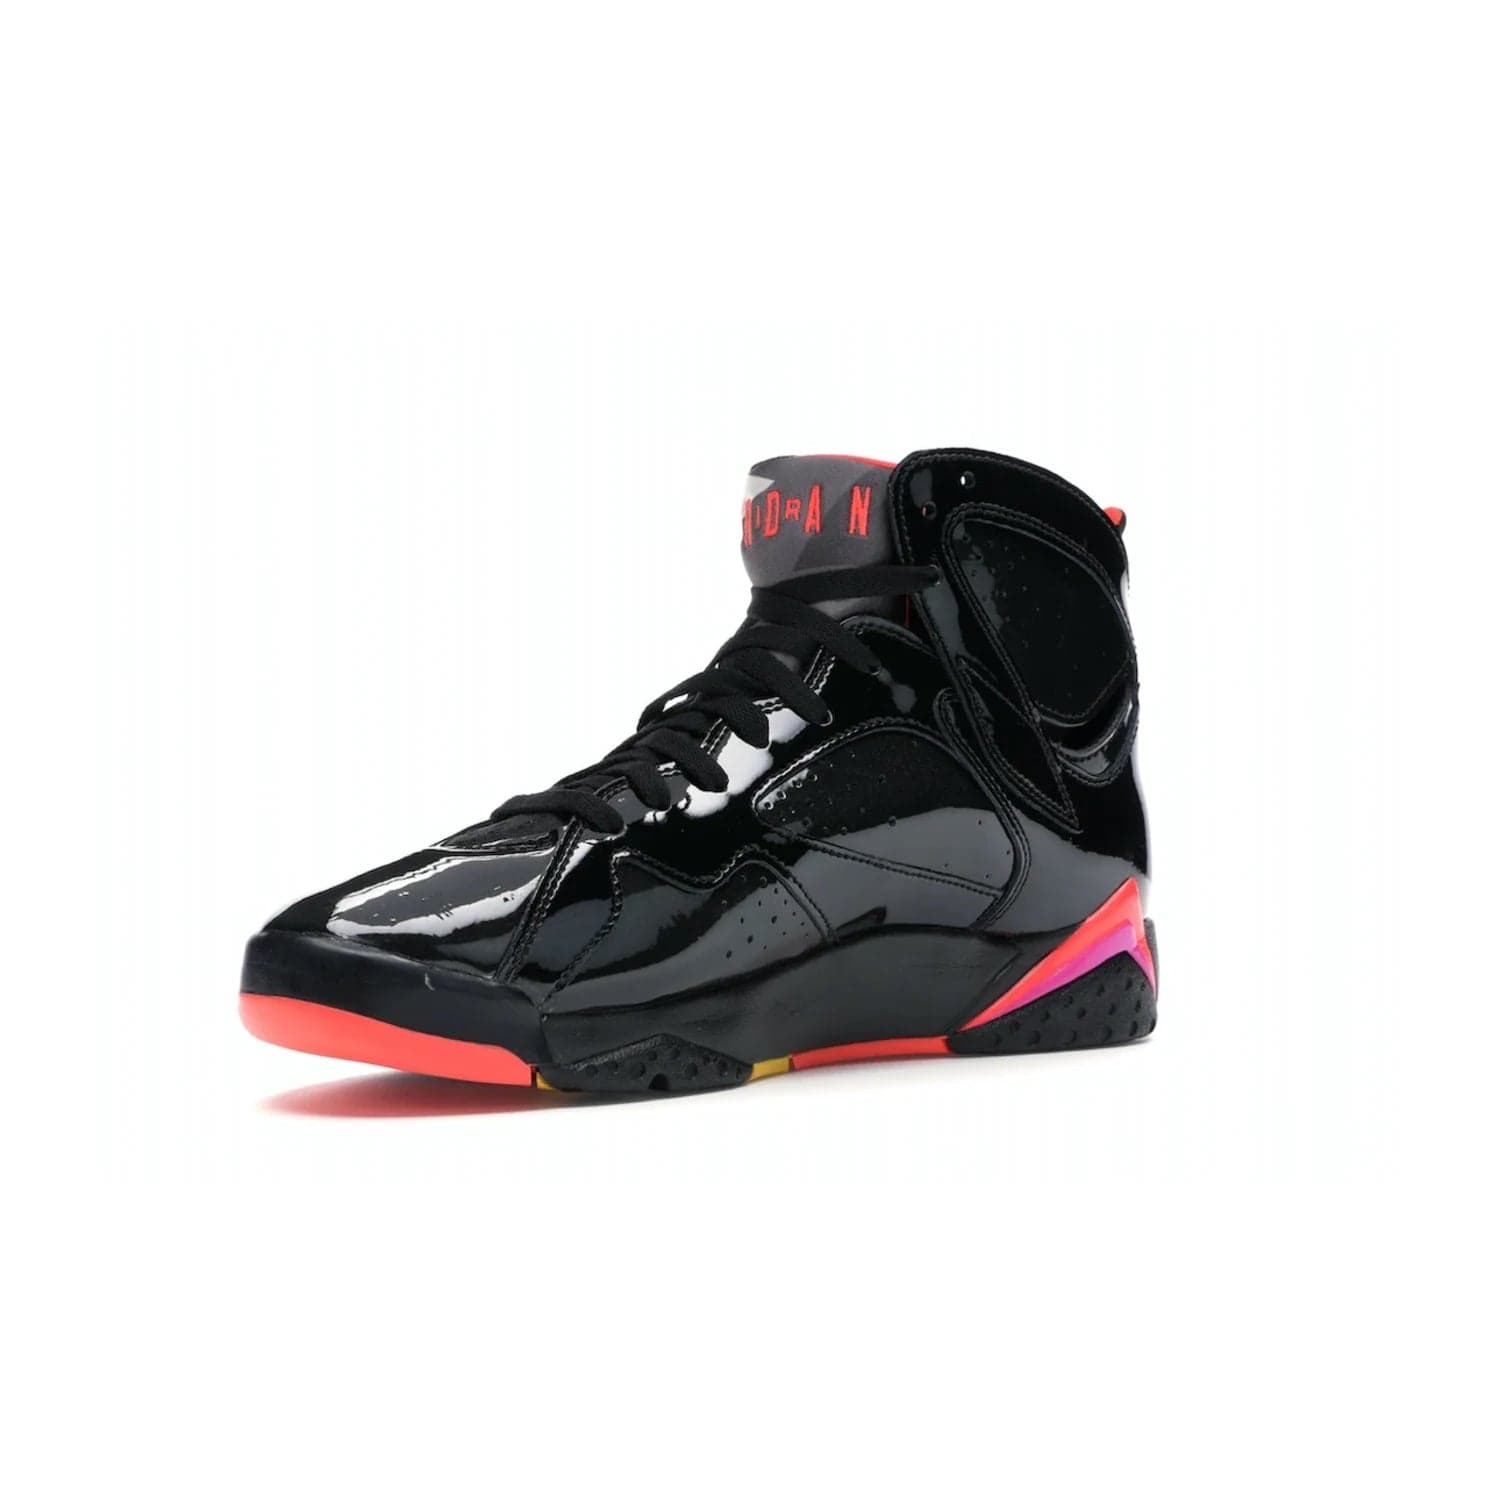 Jordan 7 Retro Black Patent (Women's) - Image 15 - Only at www.BallersClubKickz.com - #
Classic colorway! Shop the new Jordan 7 Retro Black Patent. Featuring a sleek combination of leather and patent leather upper, these shoes offer a bold yet luxurious look. Perfectly complete with a bright red Jumpman logo. Self-lacing Smart laces and Air-Sole cushion unit provide comfort and convenience.